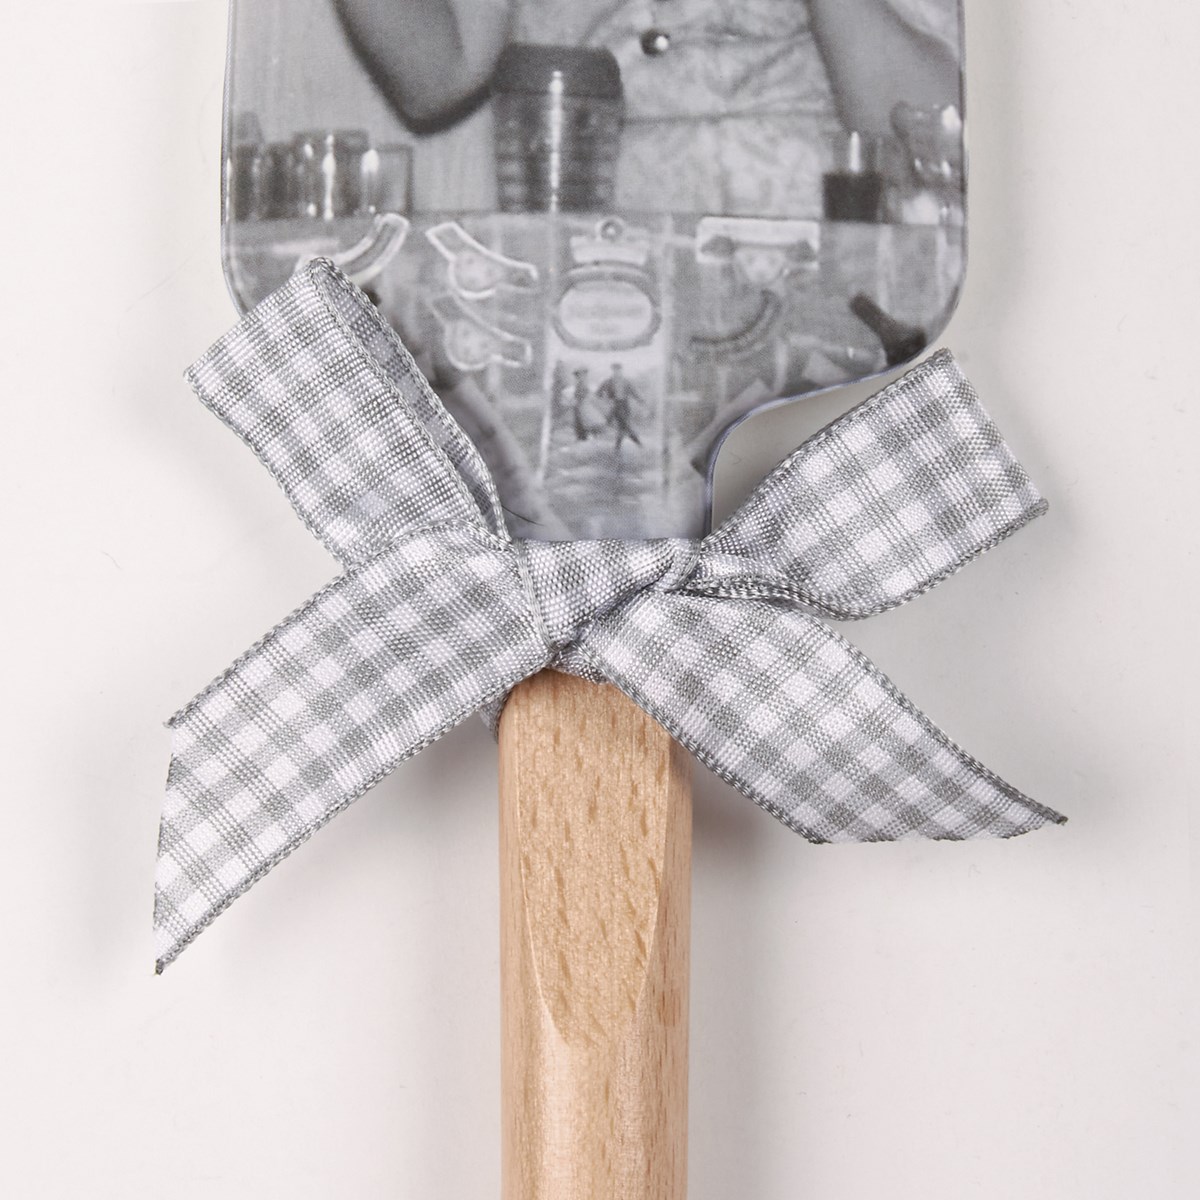 Spatula - Alcohol The Glue Holding This Together - 2.50" x 13" x 0.50" - Silicone, Wood